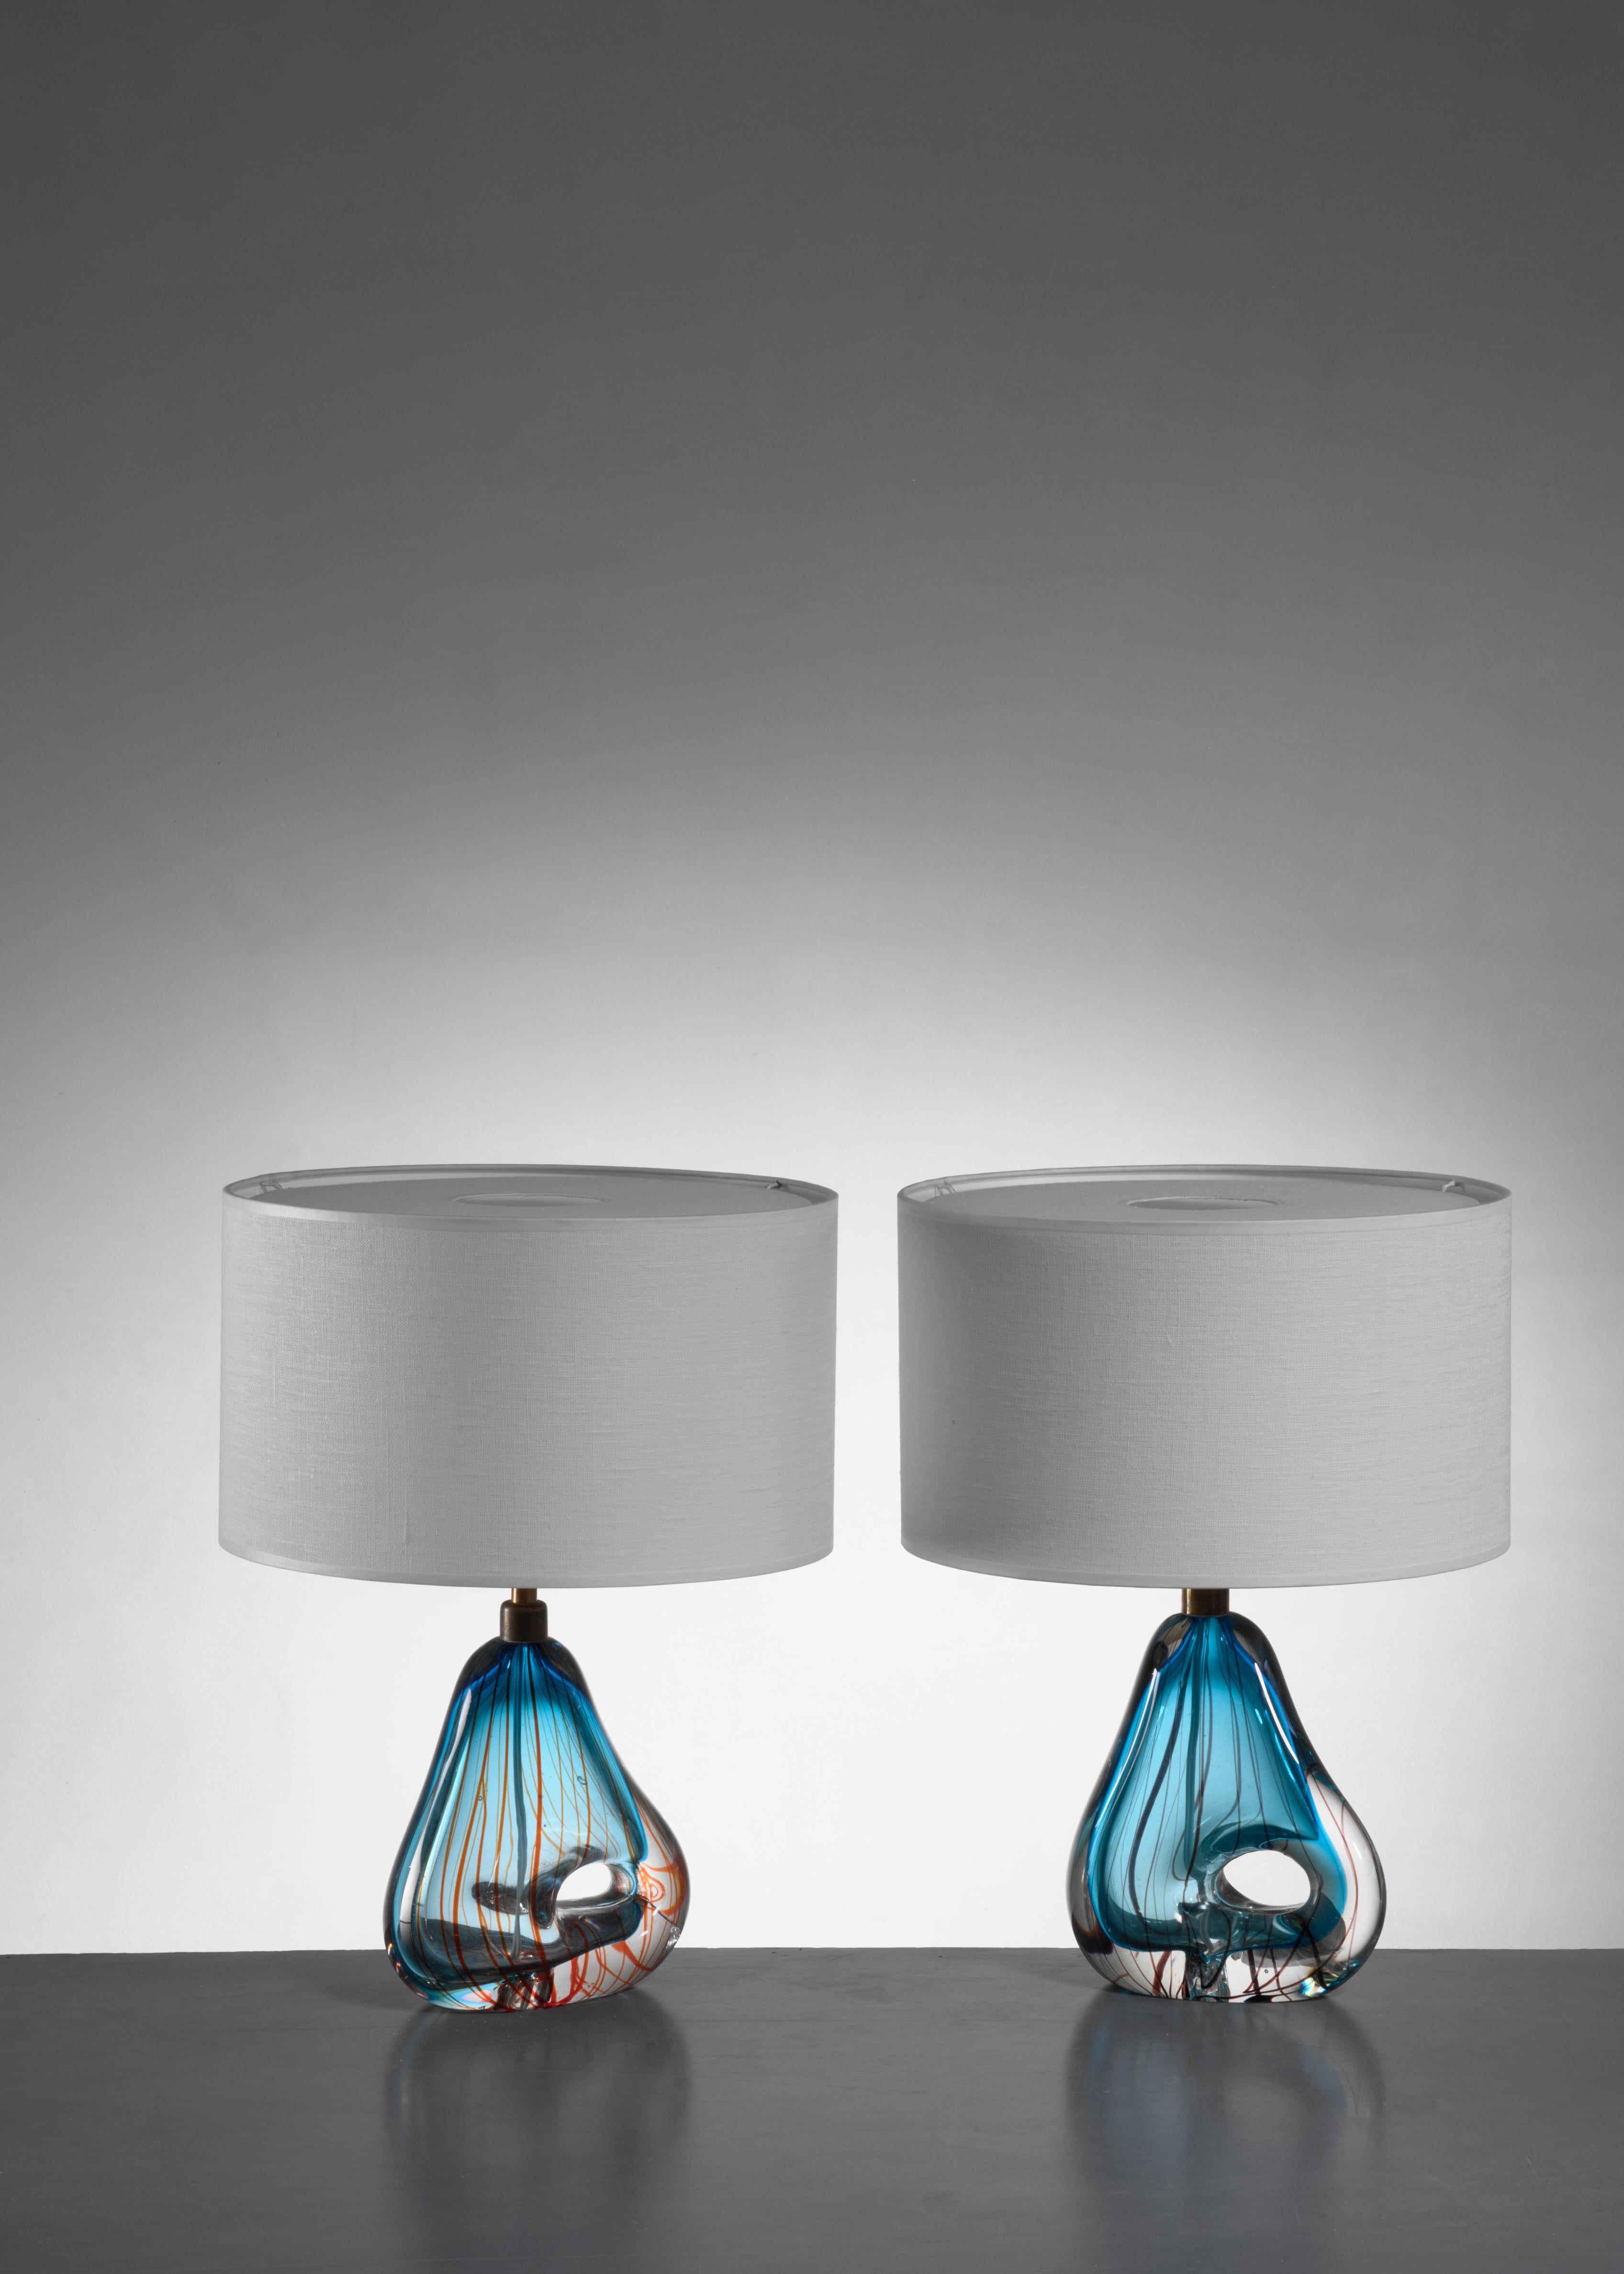 A pair of Murano glass table lamps, attributed to Dino Martens. The glass has a striped blue pattern and an opening in the base.

The measurements stated are of the lamps without a shade. The shades are newly made and other dimensions and colors